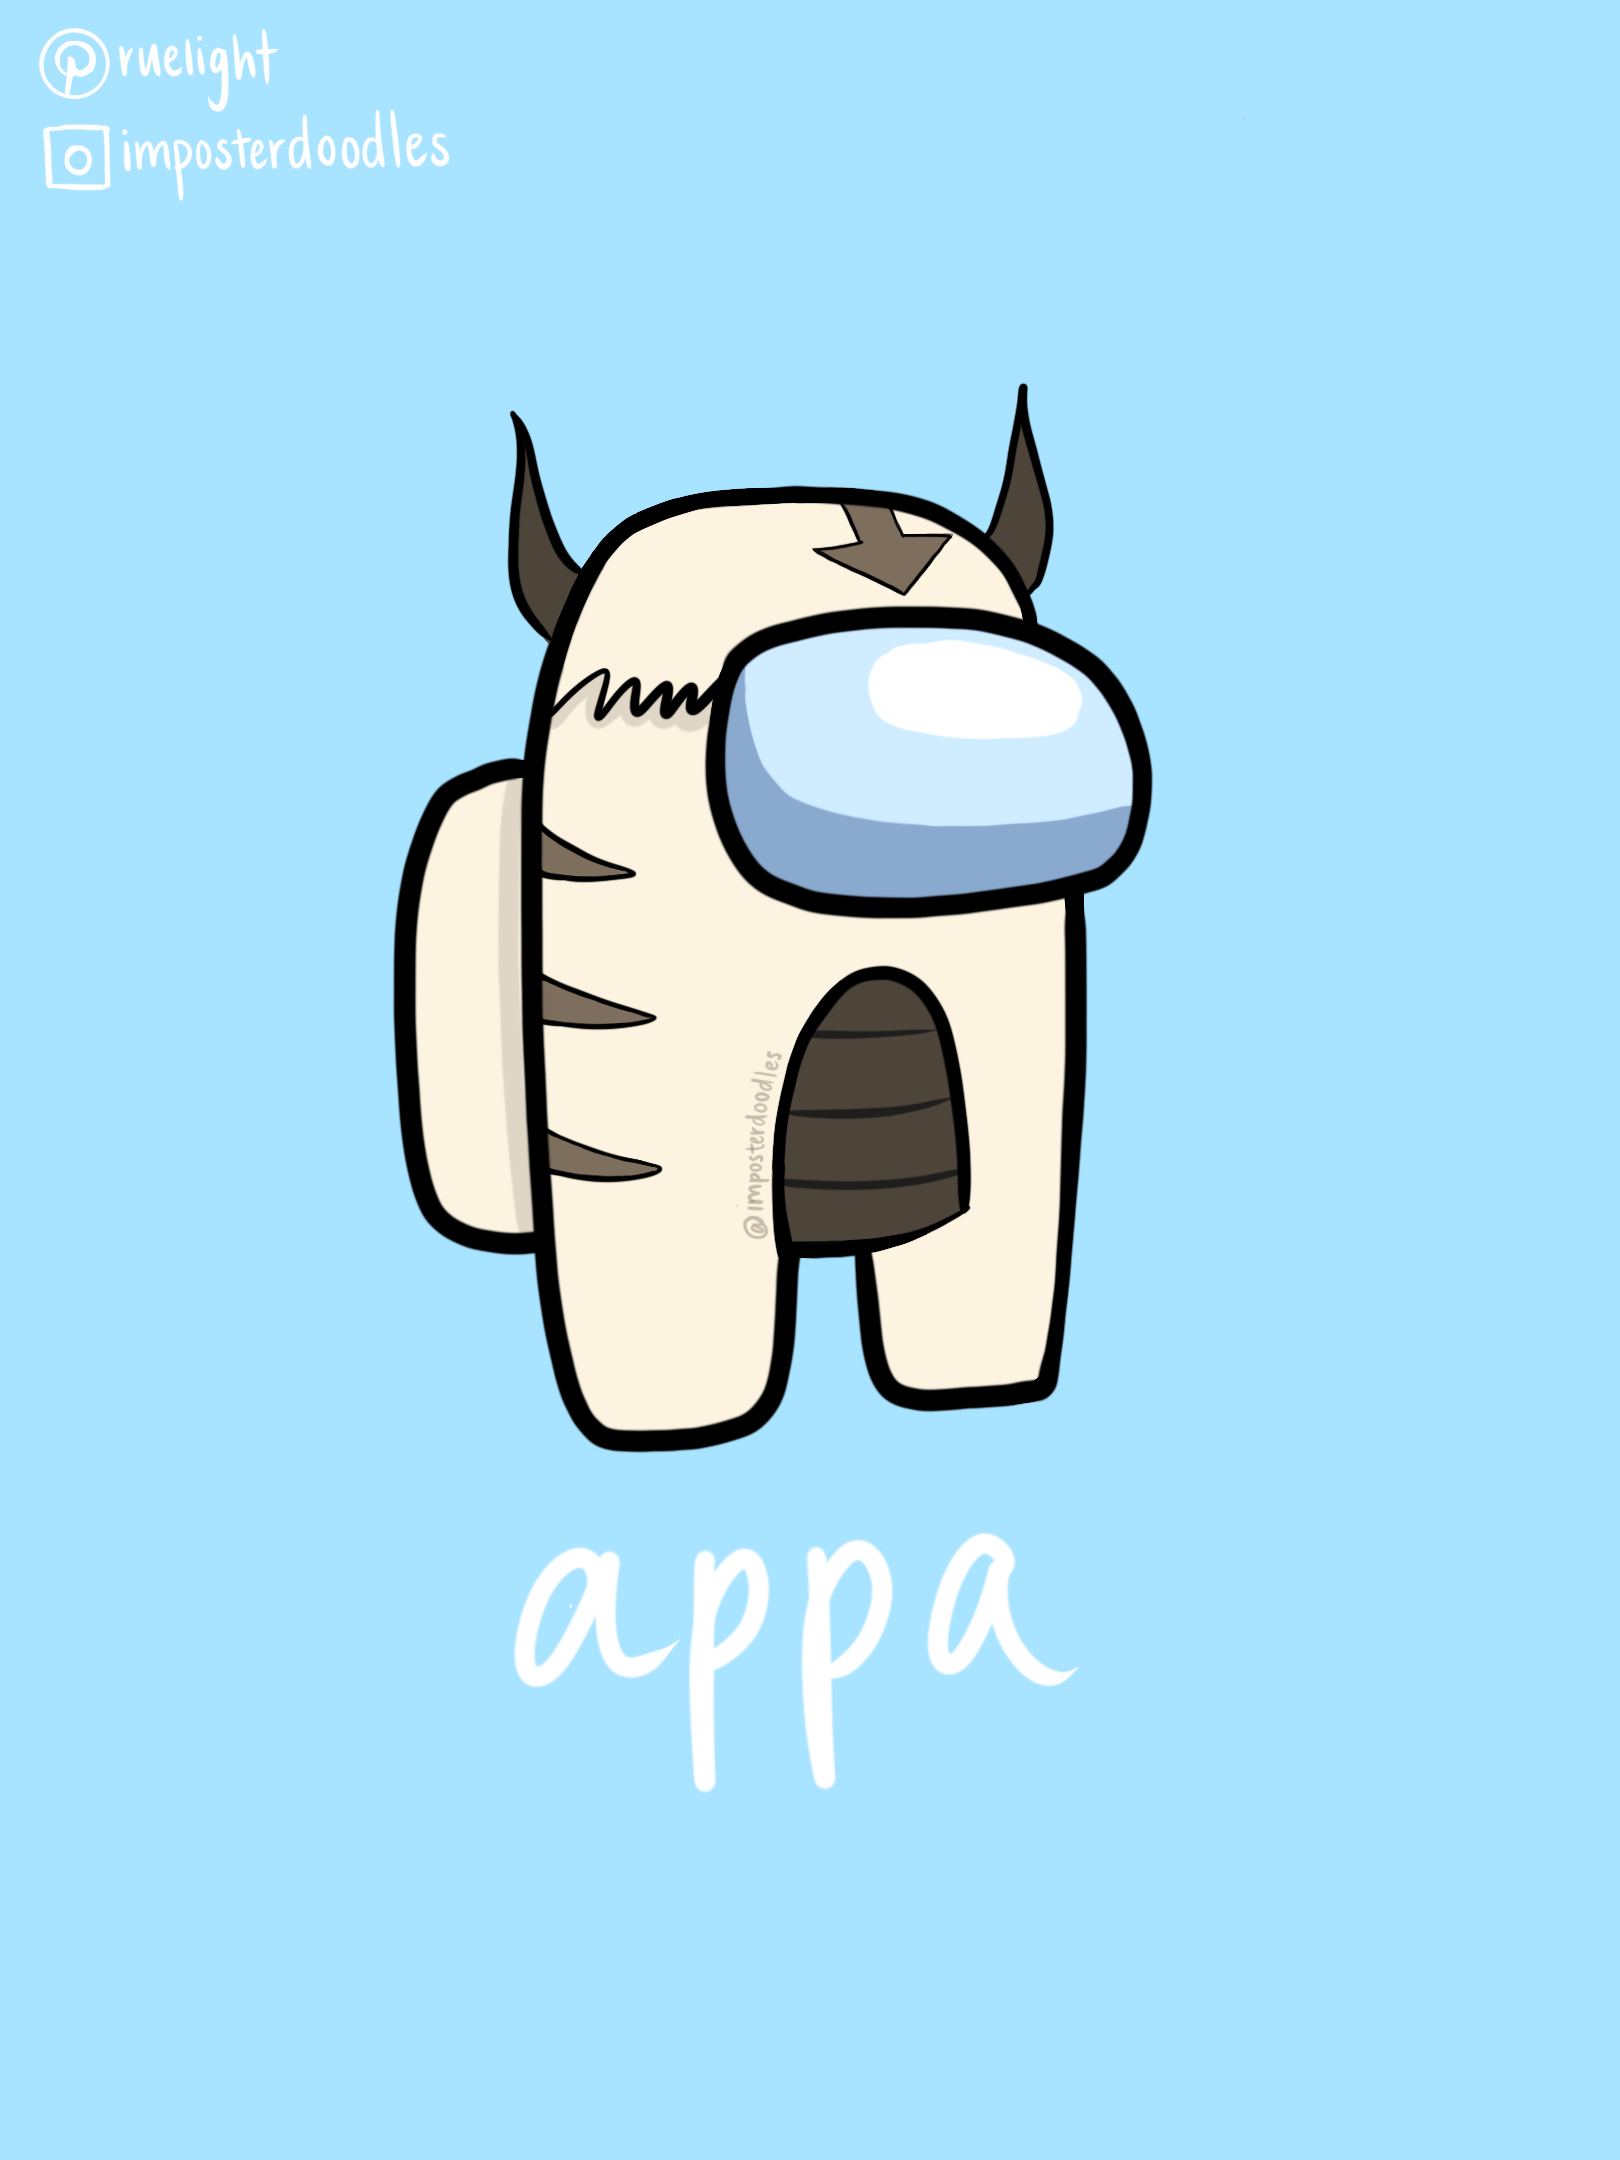 Aang & Appa x Among Us ' Sticker by ruelight. Avatar funny, Avatar zuko, Avatar picture